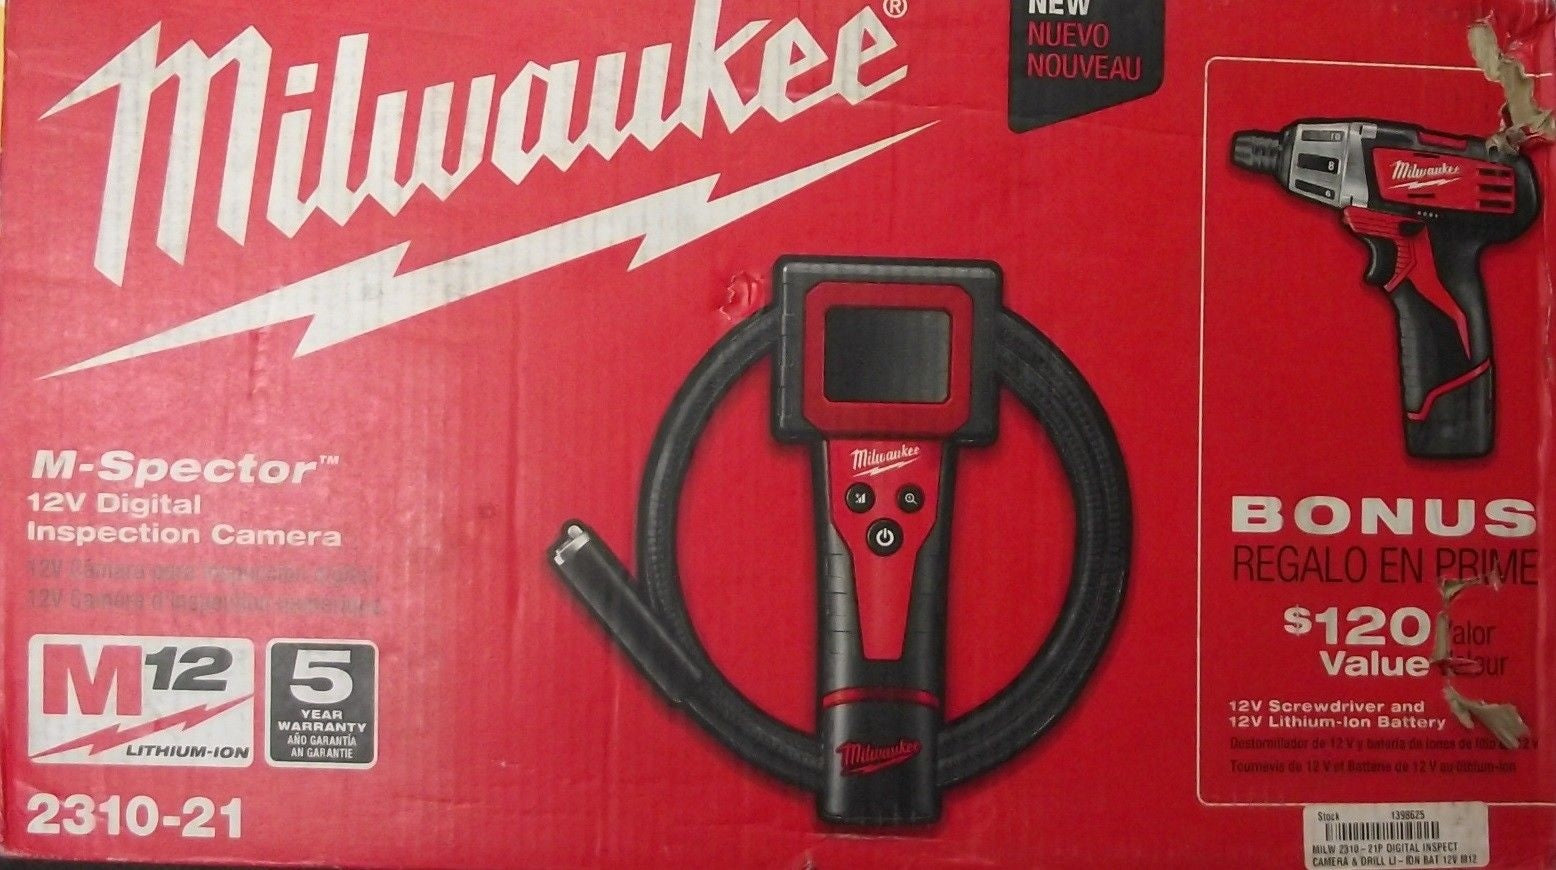 Milwaukee 2310-21 M12 12V M-Spector Inspection Scope Camera Kit With Drill